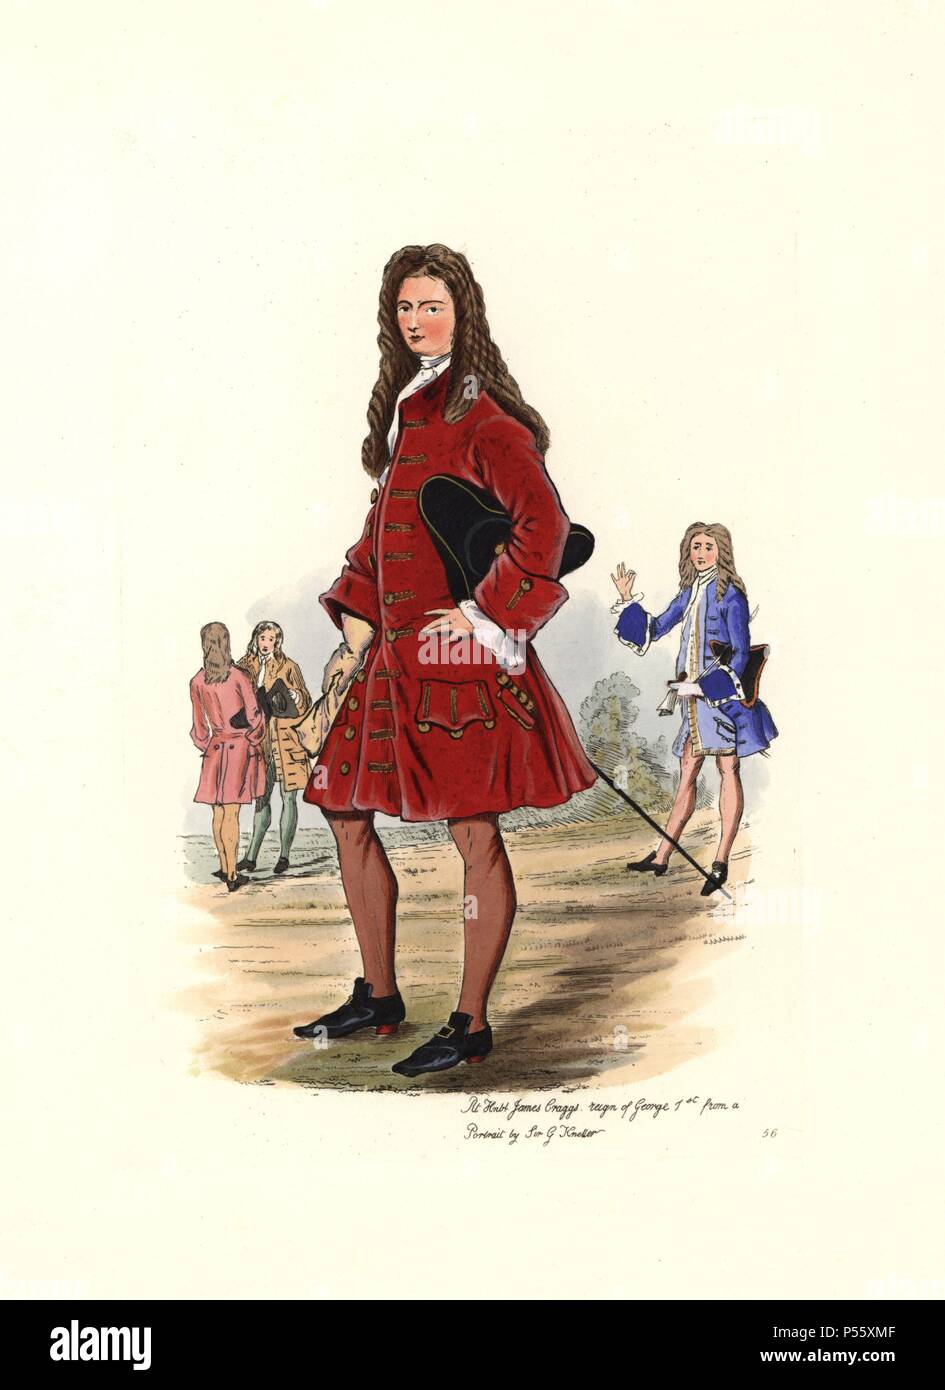 Male costume in the reign of George I. Portrait of Right Honorable James Craggs the younger (1686-1721) by Sir Godfrey Kneller. He wears a crimson jacket (dark green in Kneller's portrait), with lace cuffs, tricorn, buckled shoes and hose. The figure in the background is based on John Vanbrugh's portrait of actor Colley Cibber as Lord Foppington. Handcolored engraving from "Civil Costume of England from the Conquest to the Present Period" drawn by Charles Martin and etched by Leopold Martin, London, Henry Bohn, 1842. The costumes were drawn from tapestries, monumental effigies, illuminated man Stock Photo